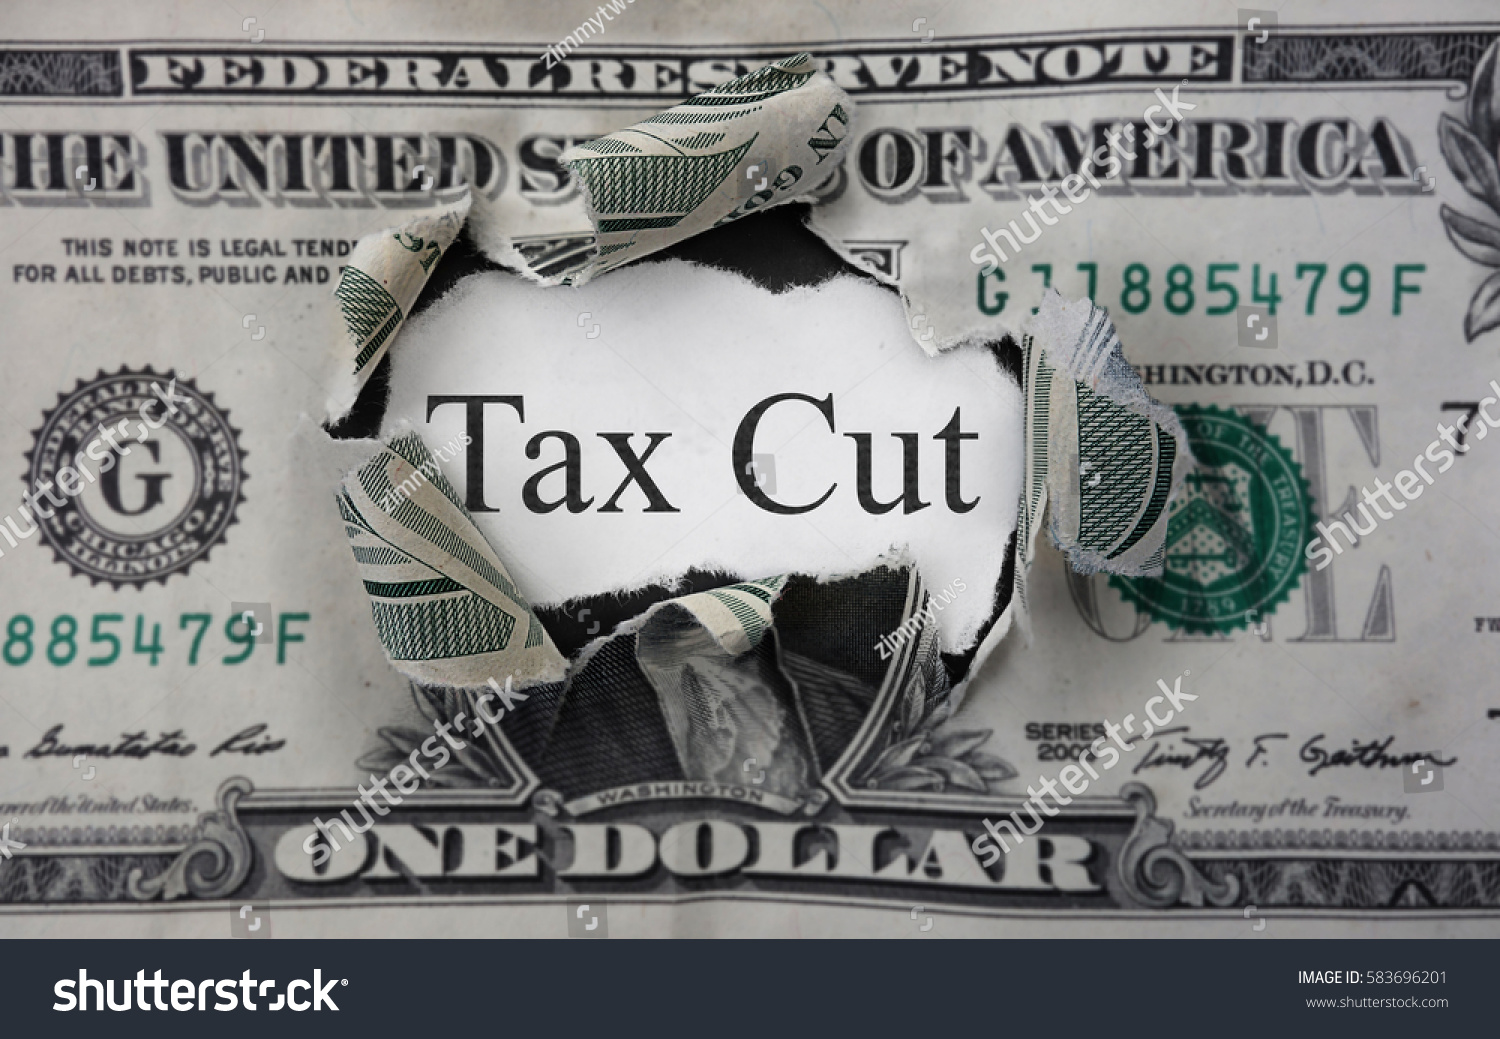 Tax Cut text on a scrap of paper within a torn dollar bill                                #583696201